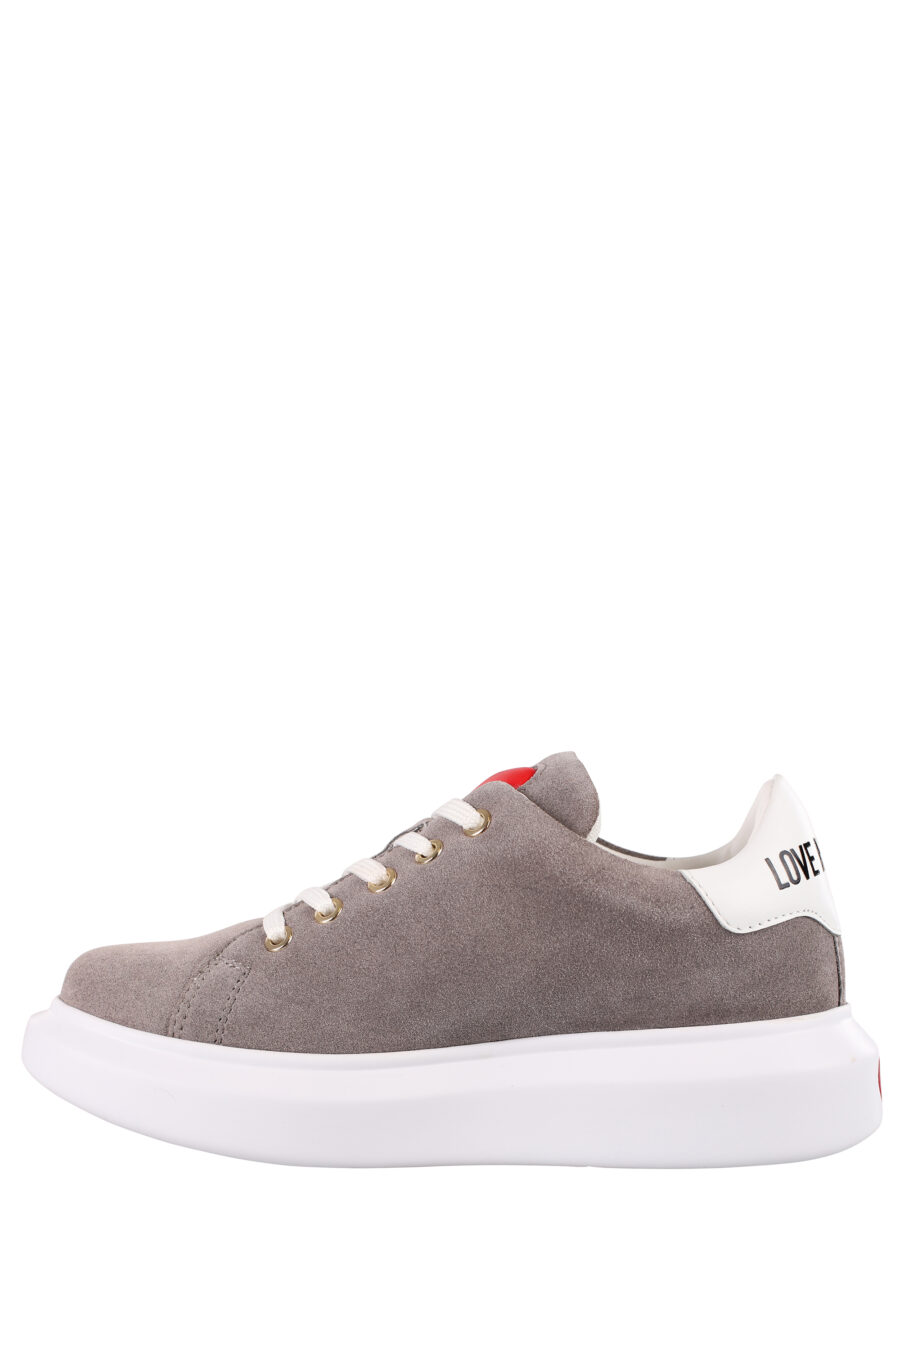 Grey trainers with gold metal logo and white sole - IMG 1184